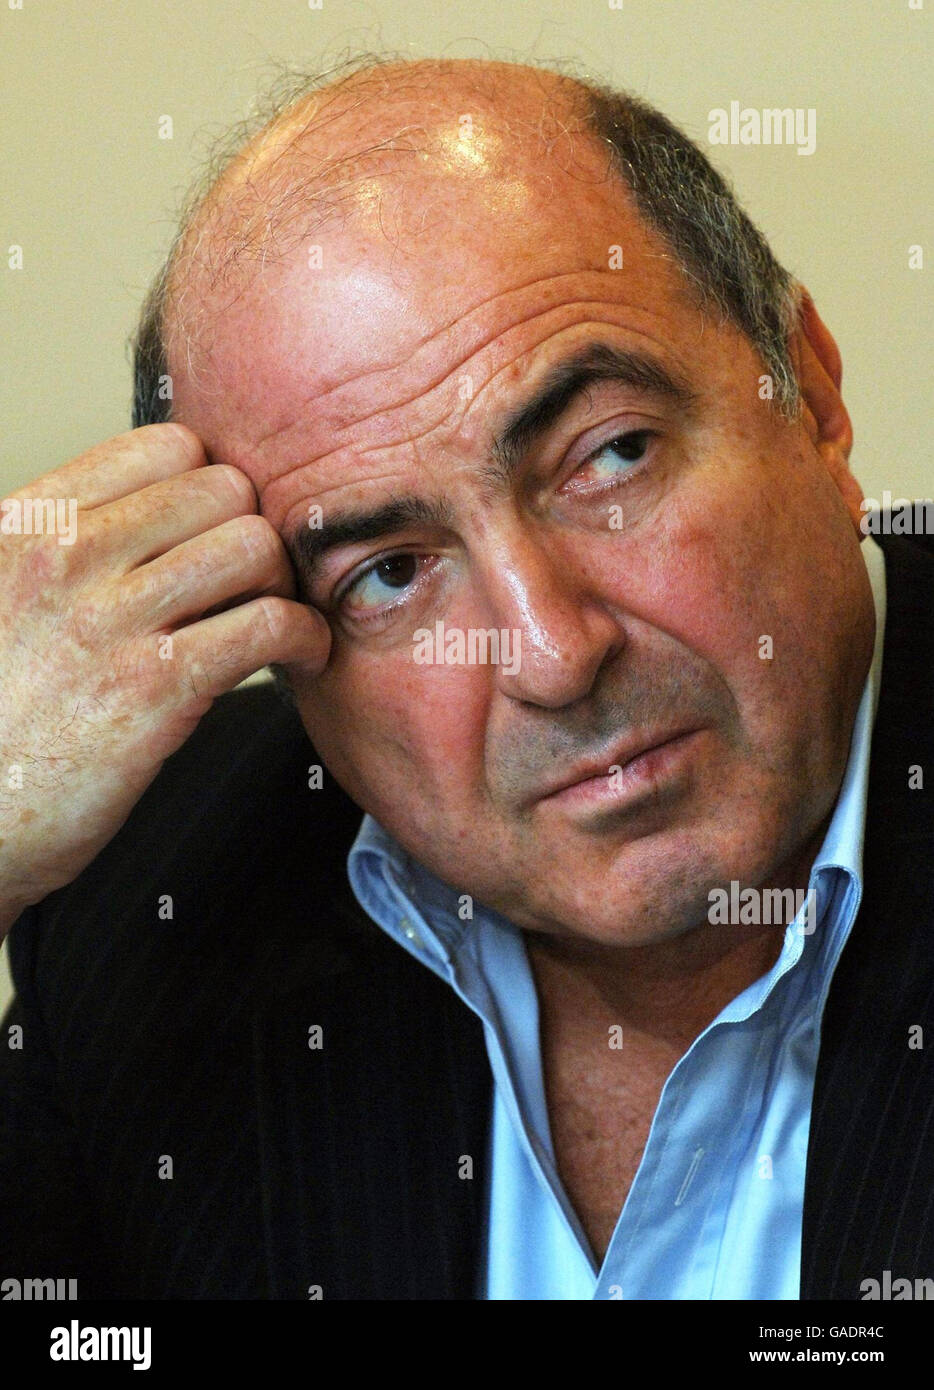 Russian billionaire Boris Berezovsky at a news conference today on the first anniversary of the death of his friend Alexander Litvinenko. Stock Photo